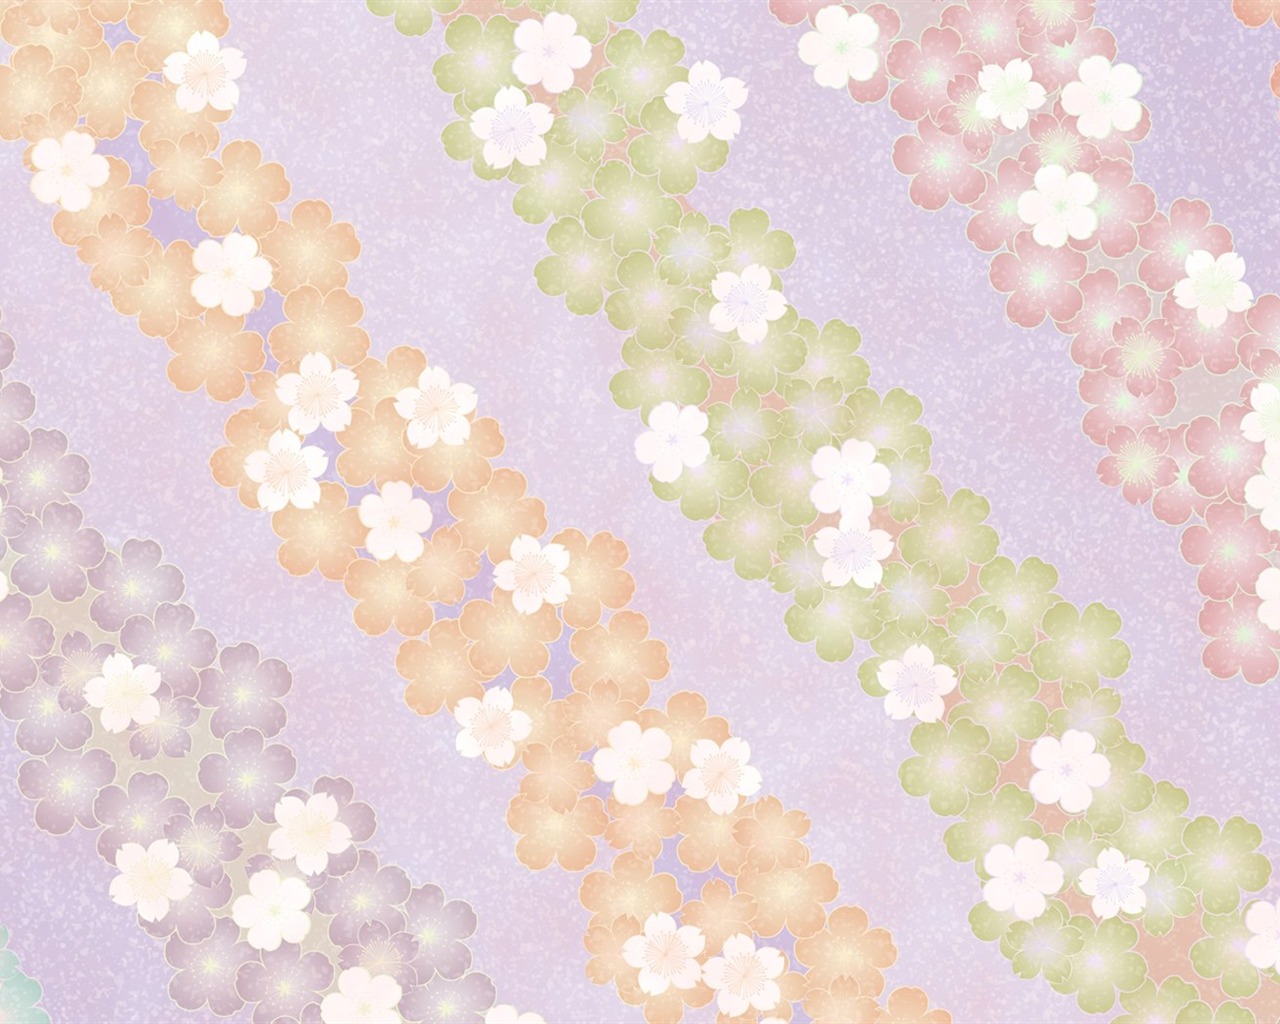 Japan style wallpaper pattern and color #10 - 1280x1024